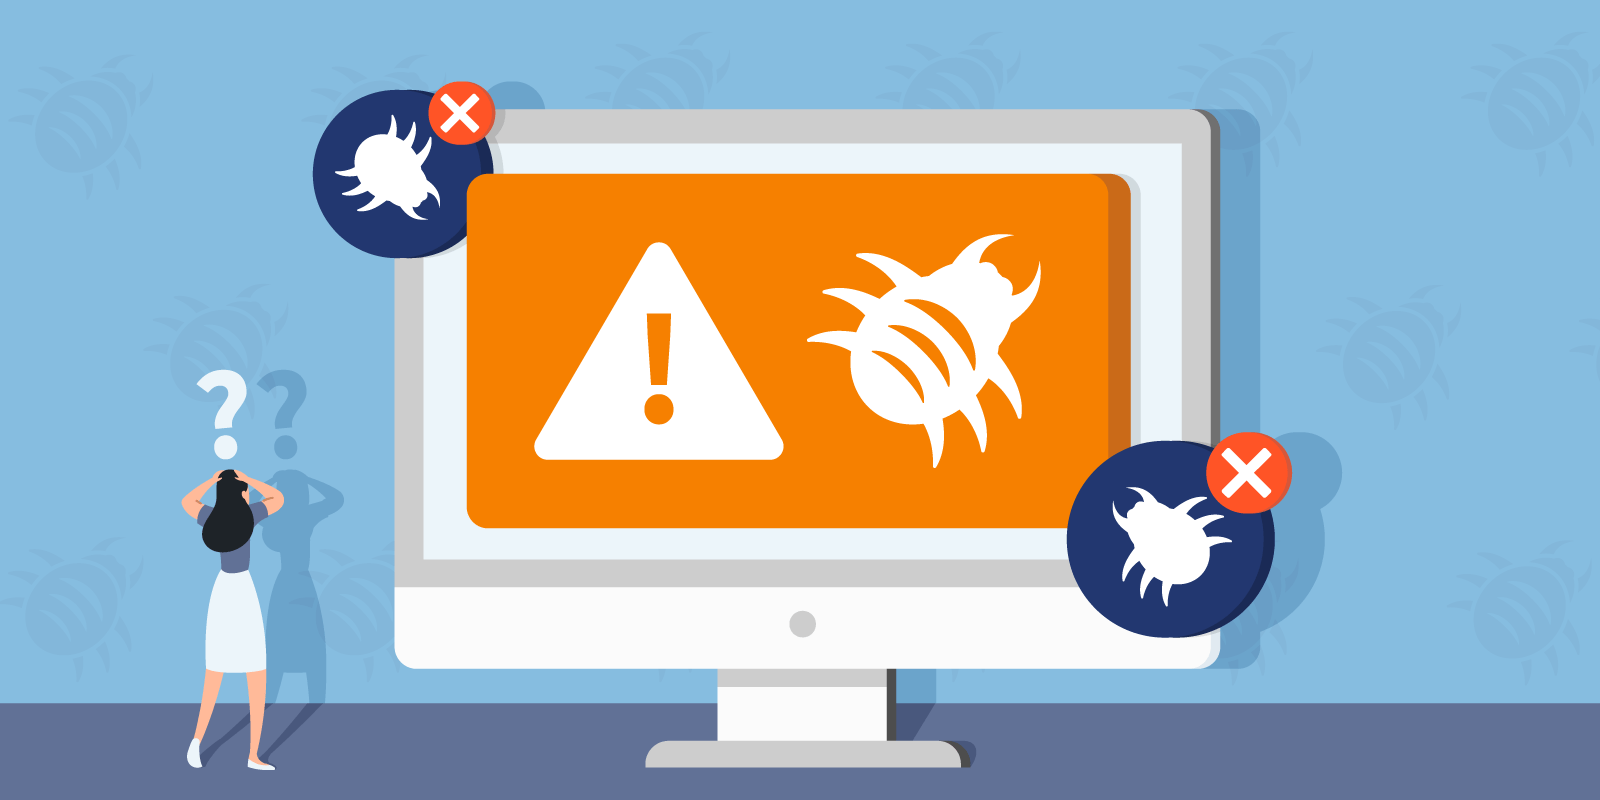 Scan downloaded files with an updated antivirus program before opening them.
If you suspect a file to be malicious, delete it immediately.